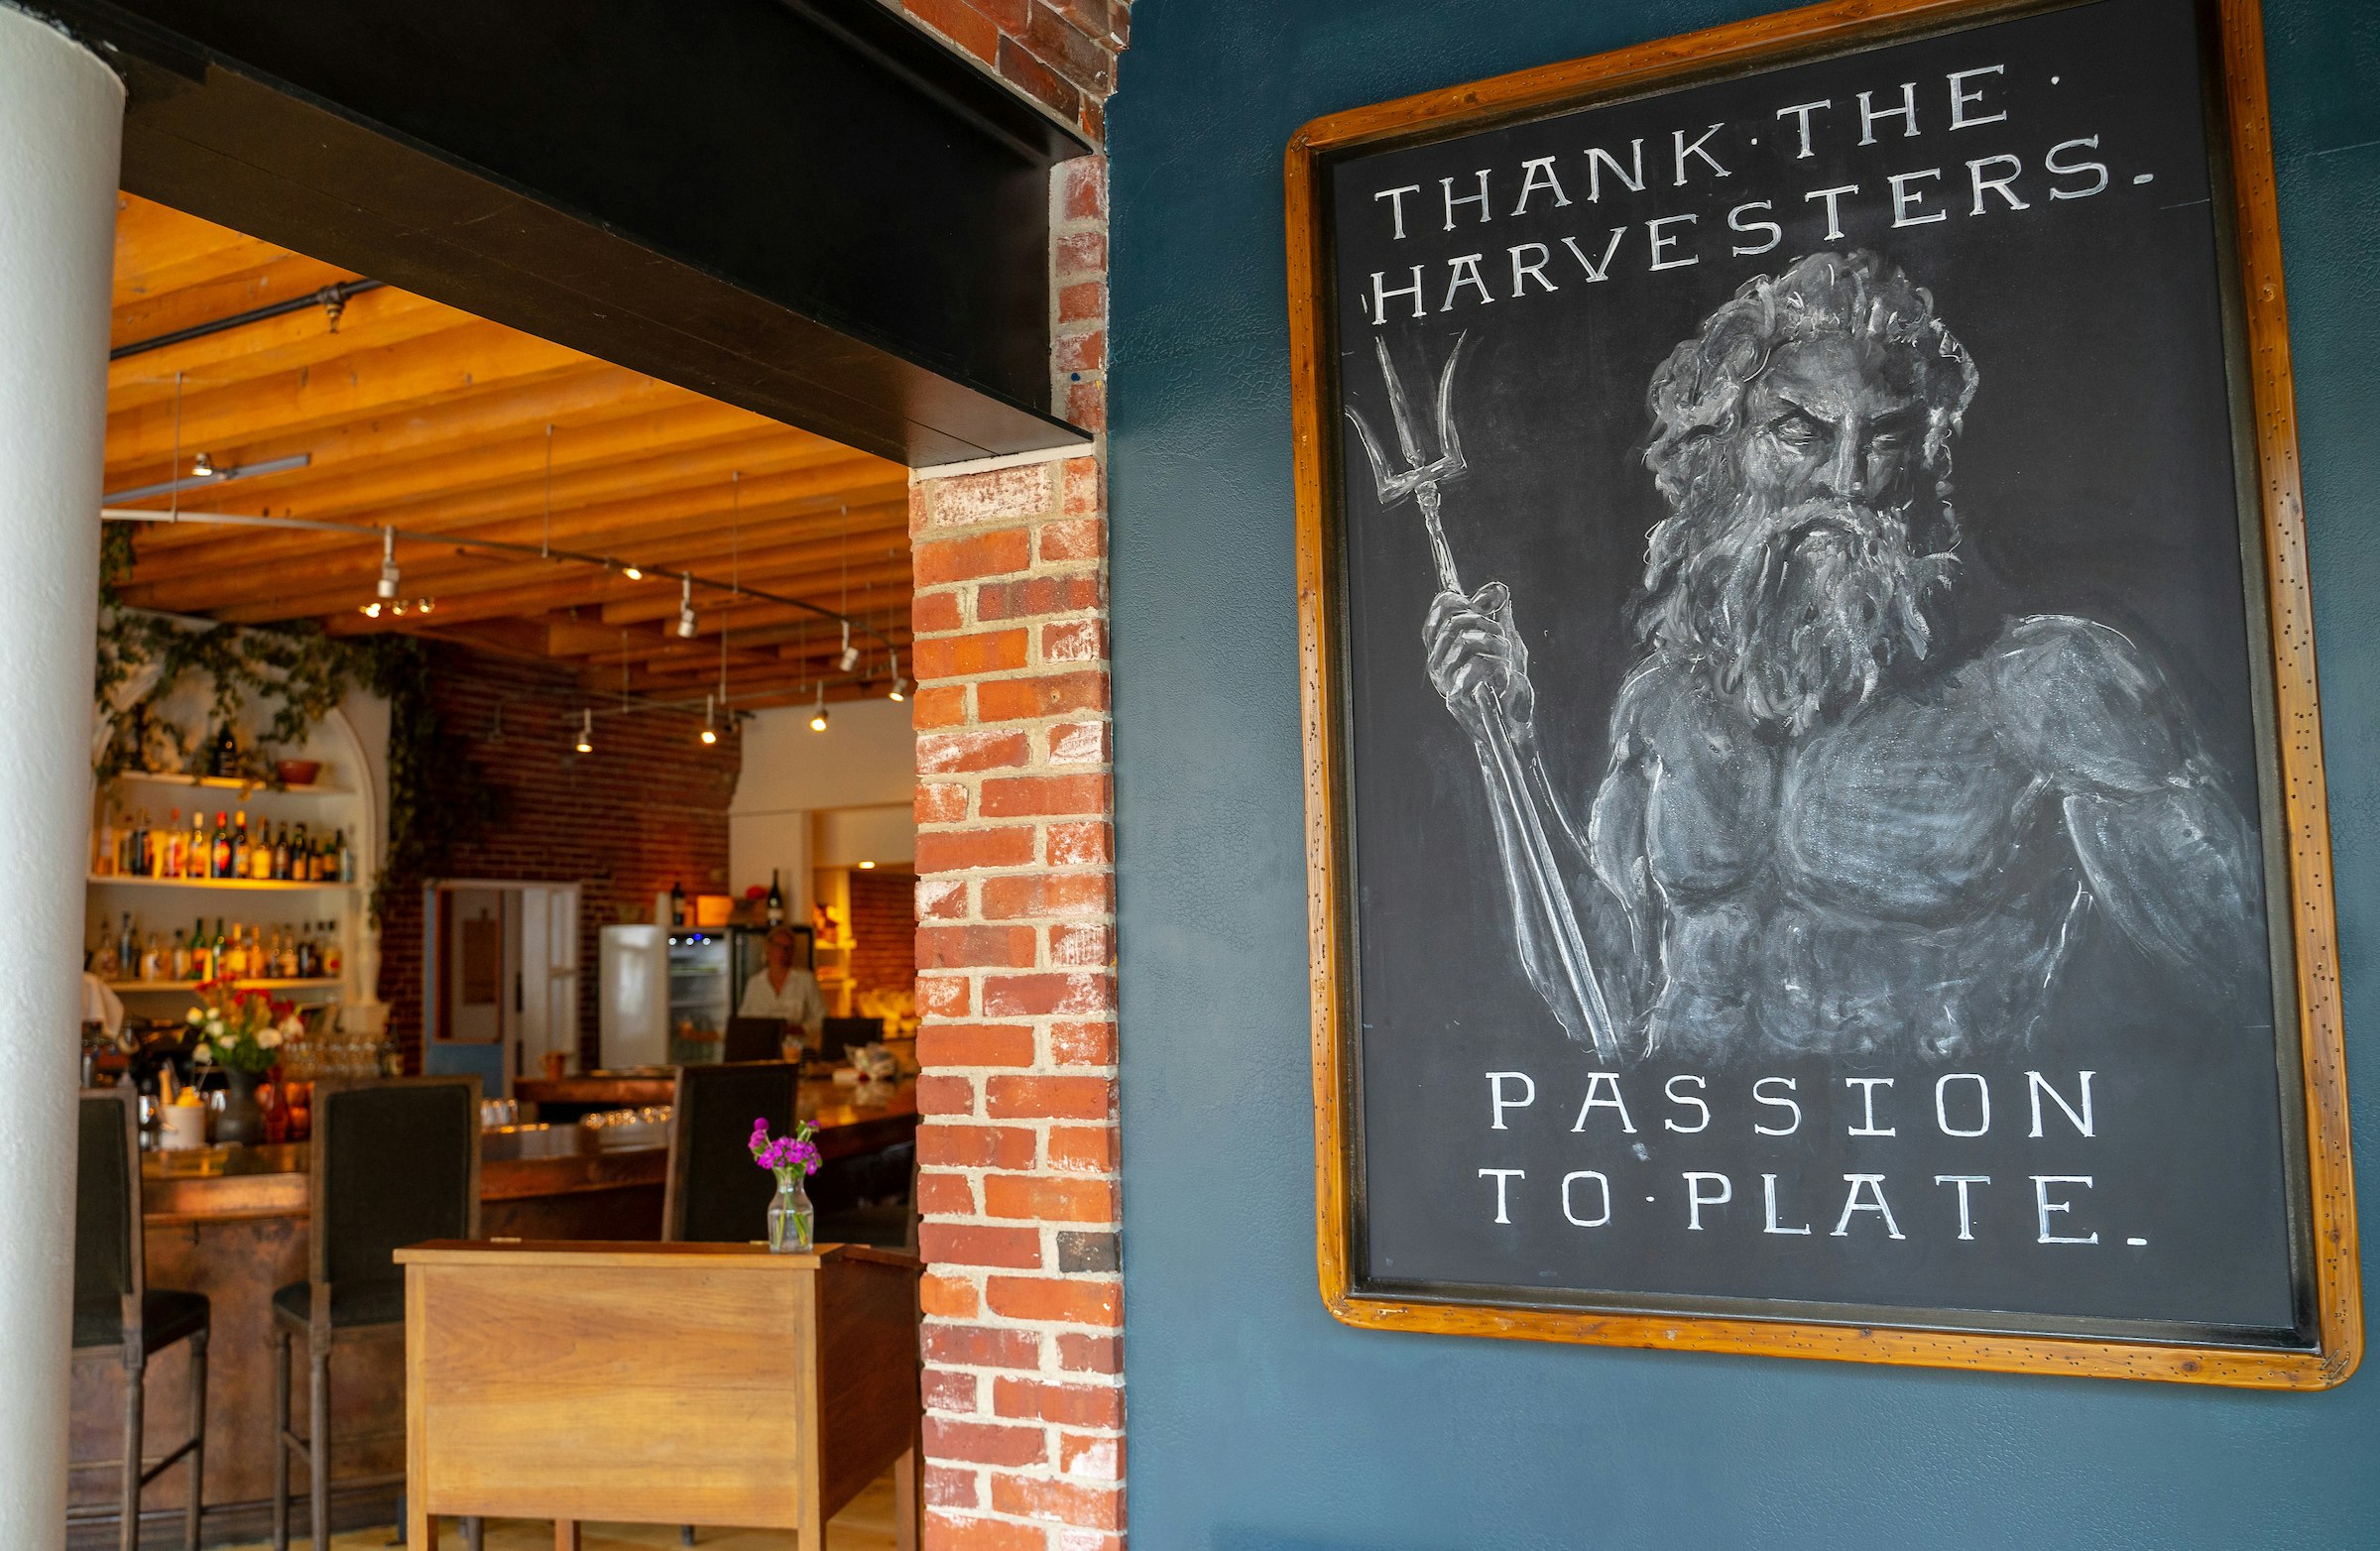 The entrance to Solo Italiano on Portland, Maine features a black chalkboard with a drawing of the sea god Poseidon and the words "Thank the Harvesters" "Passion to Plate" in a serif font. Beyond is a warm room in brick and wood with a brightly lit bar full of colorful bottles and a hostess stand with pink flowers in a bud vase 